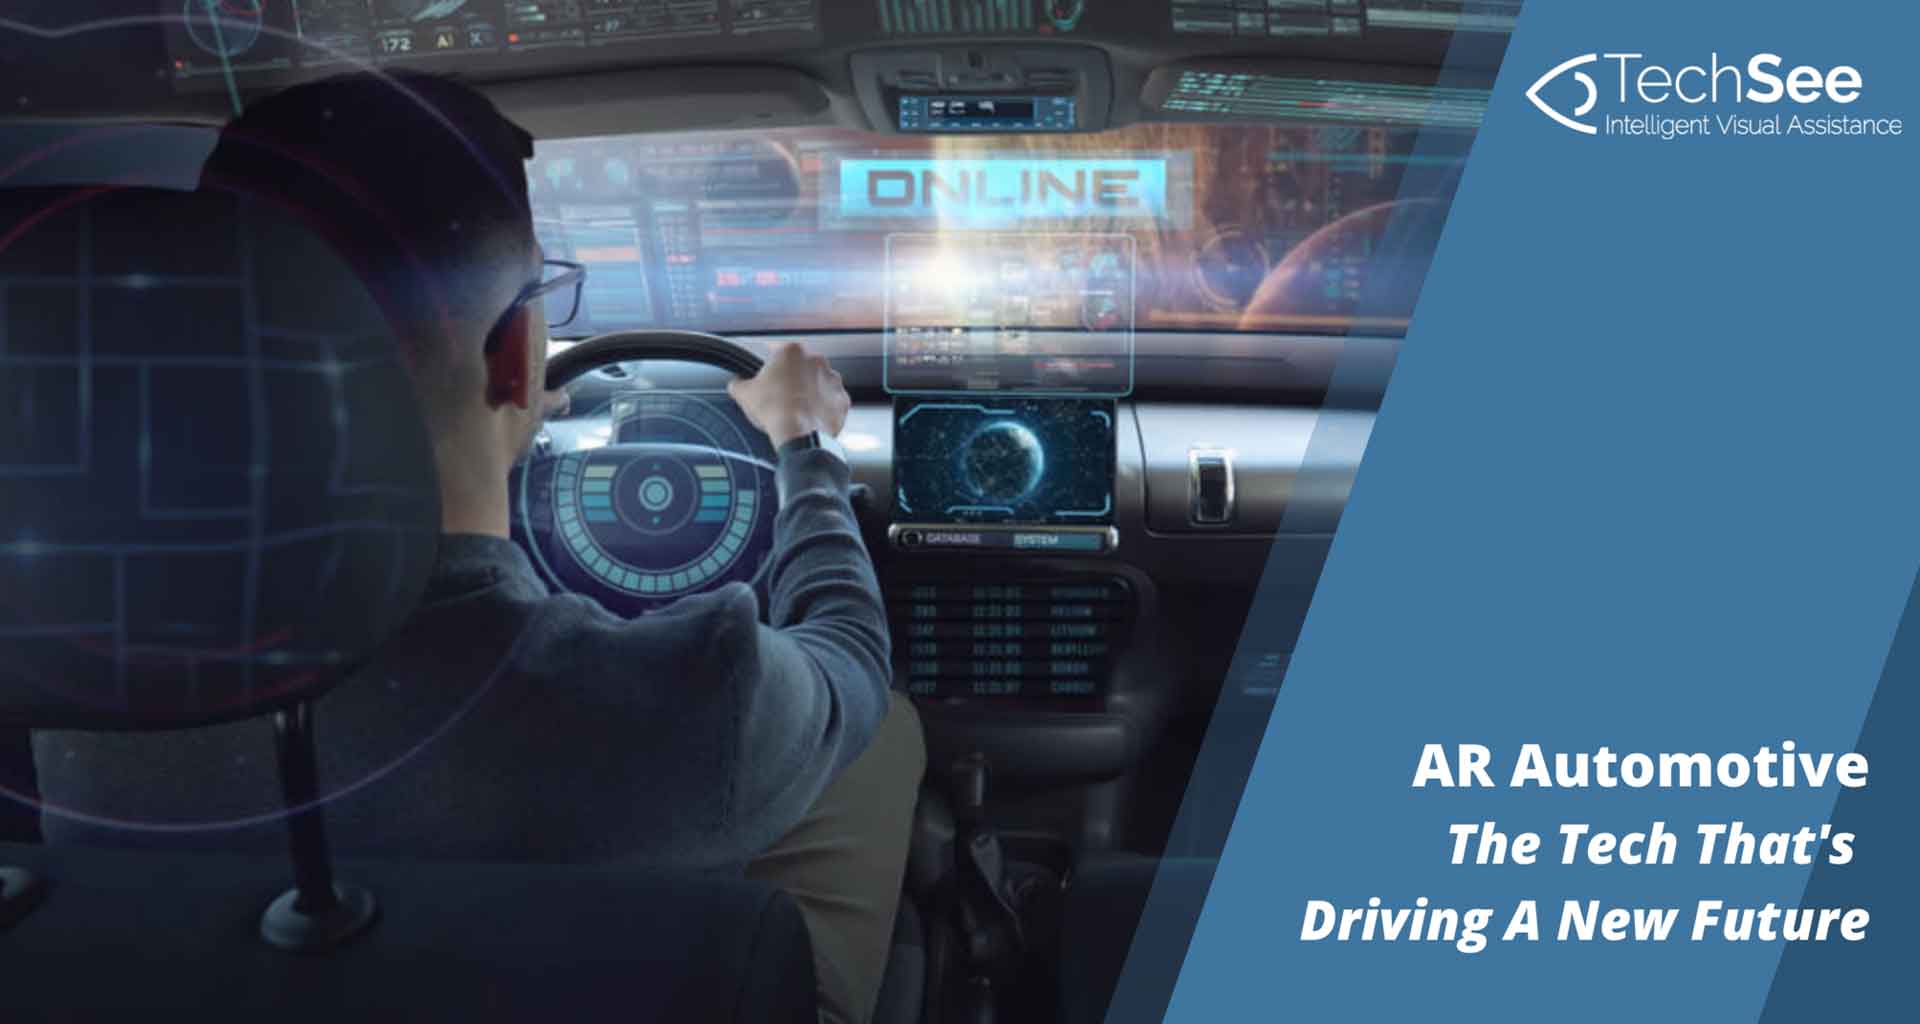 AR in the Automotive Industry: The Tech That’s Driving A New Future